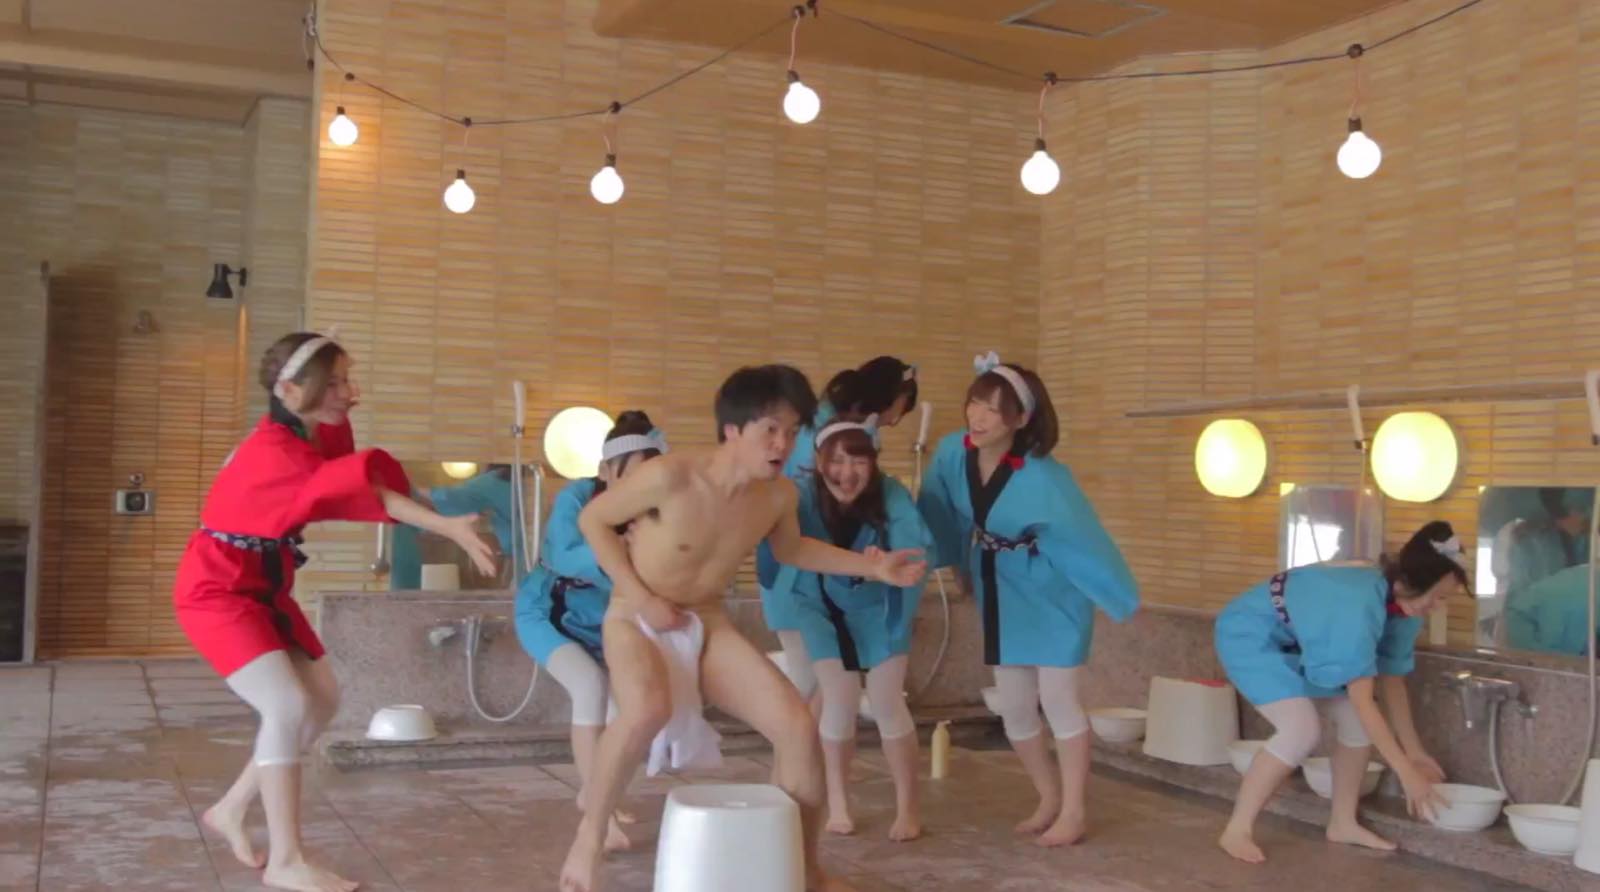 Tochiotome 25 Invite You to a Unique Onsen Experience in the MV for “Yu”!